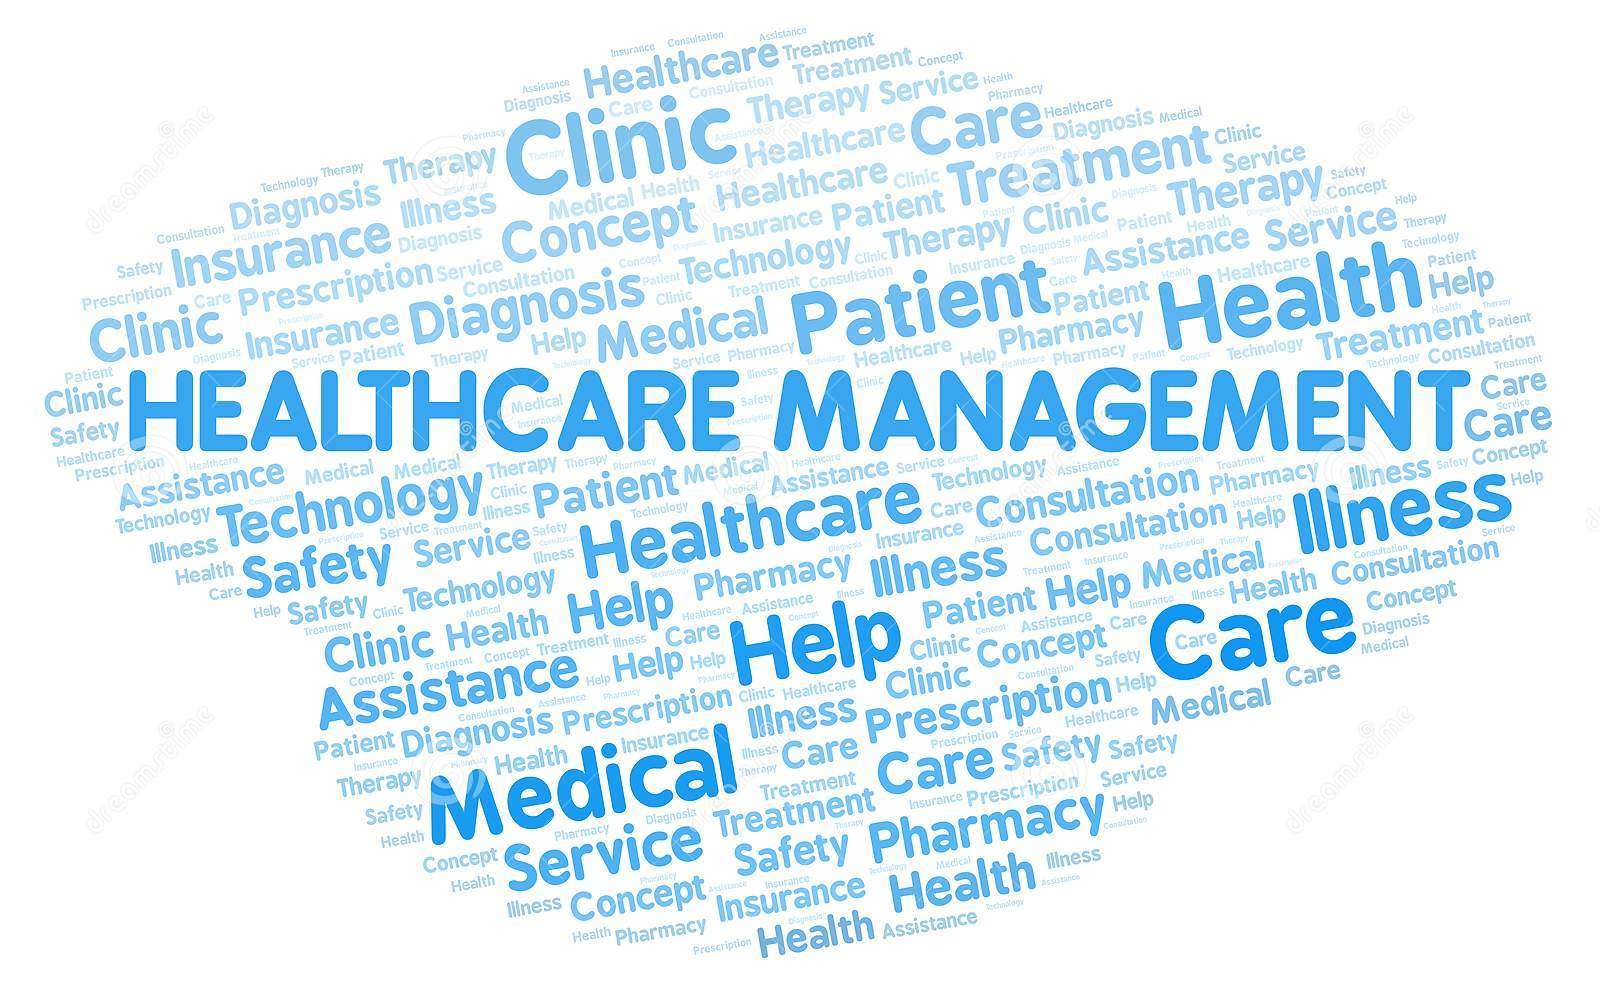 Training and Development Solutions for Health and Healthcare Management Professionals